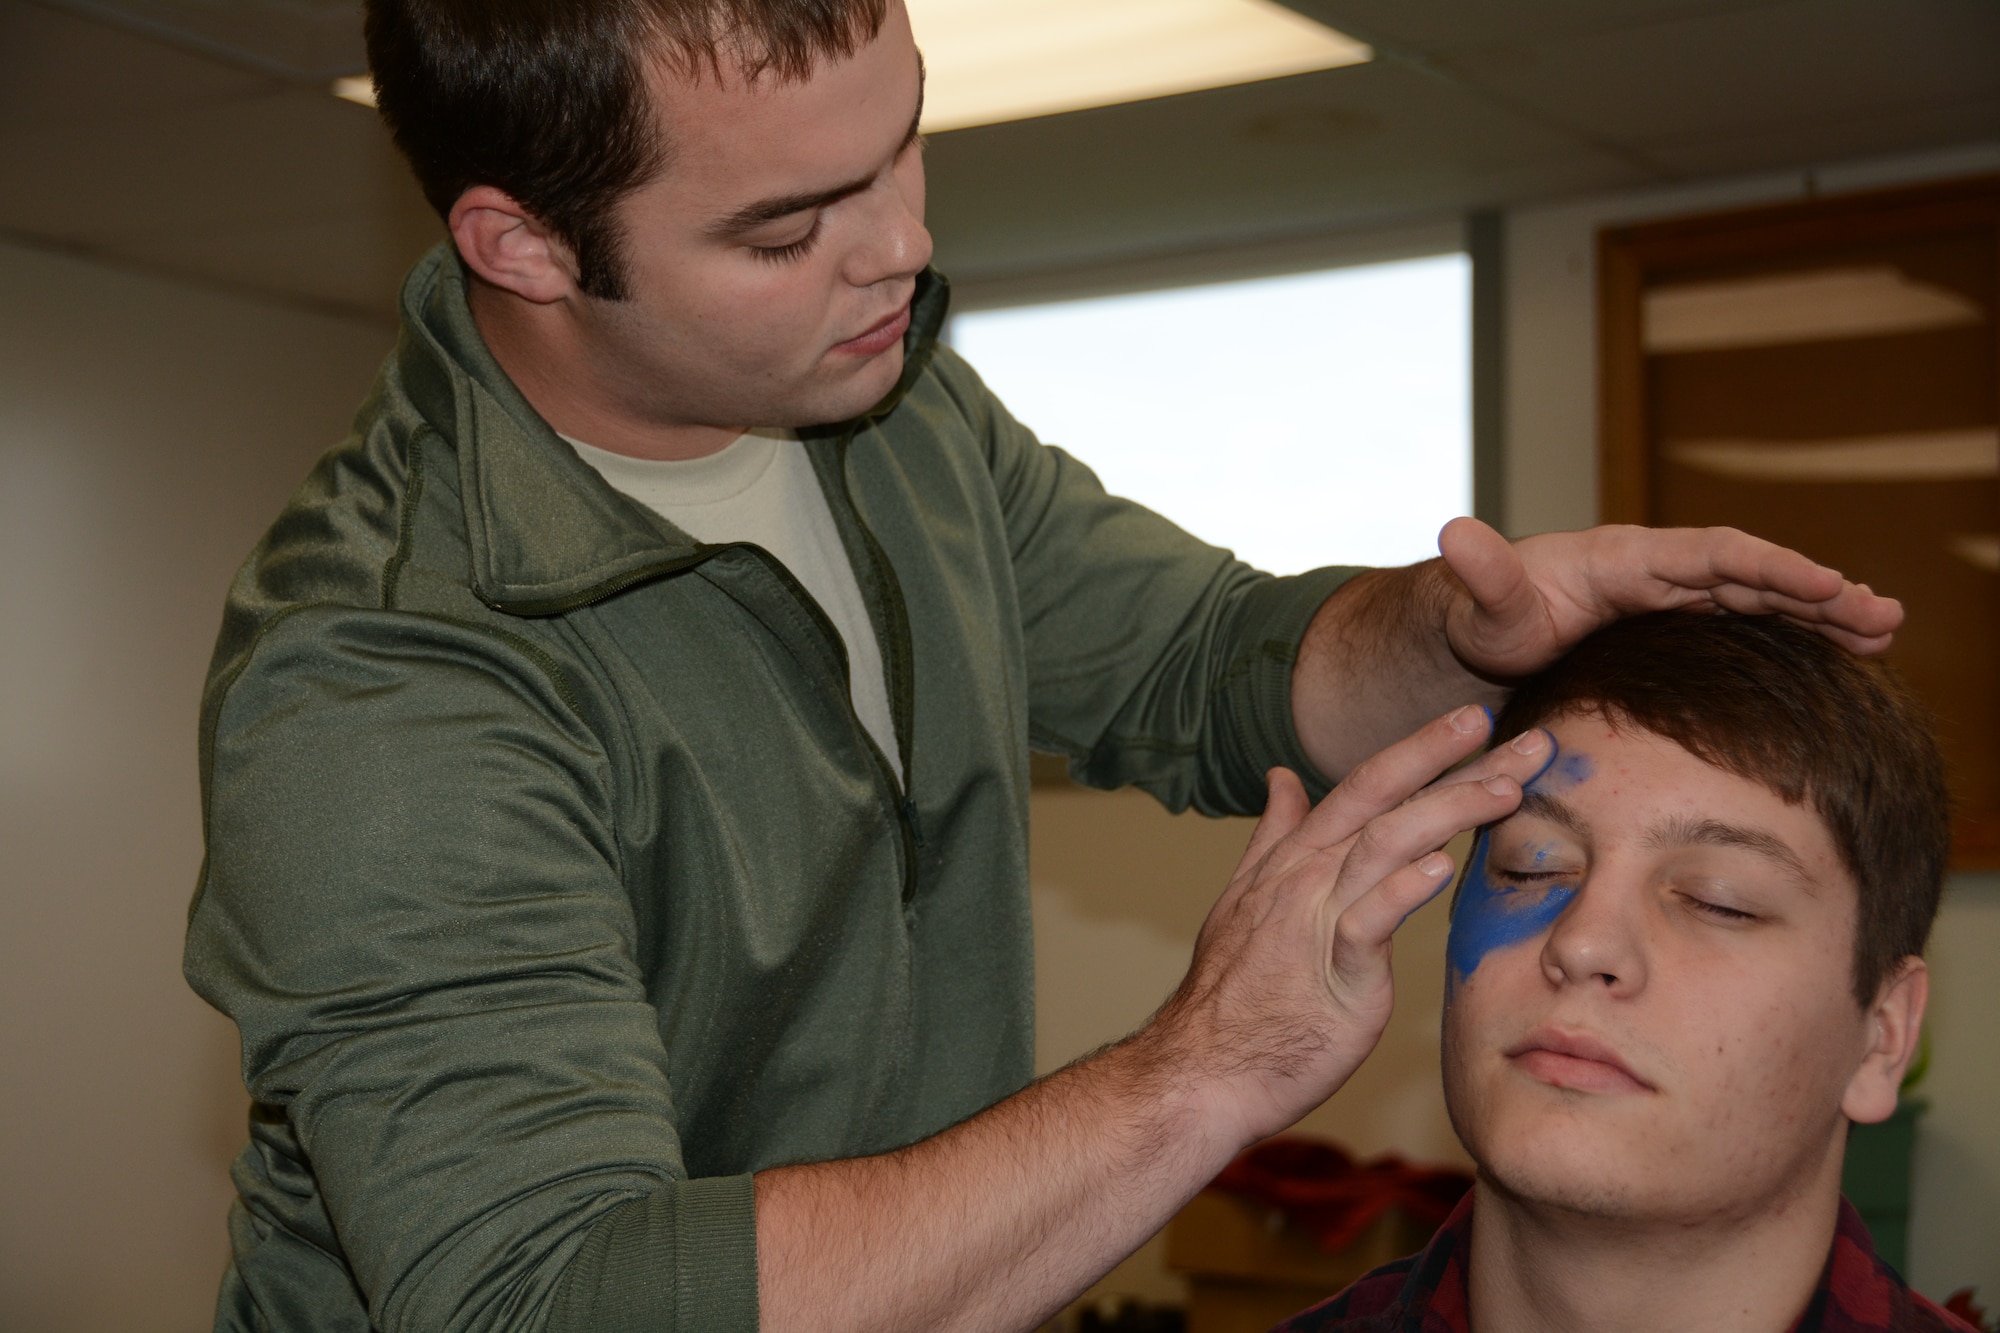 Senior Airman Greg Meyer, 512th Aerospace Medicine Squadron, applies makeup onto the face of Delaware Civil Air Patrol cadet John Boyer Nov. 2, 2014, at Dover Air Force Base, Del. Boyer and other CAP cadets played the roles of victims during a training exercise to prepare 512th AMDS reservists to respond to real world mass casualty emergencies. (U.S. Air Force photo/Senior Airman Joe Yanik)